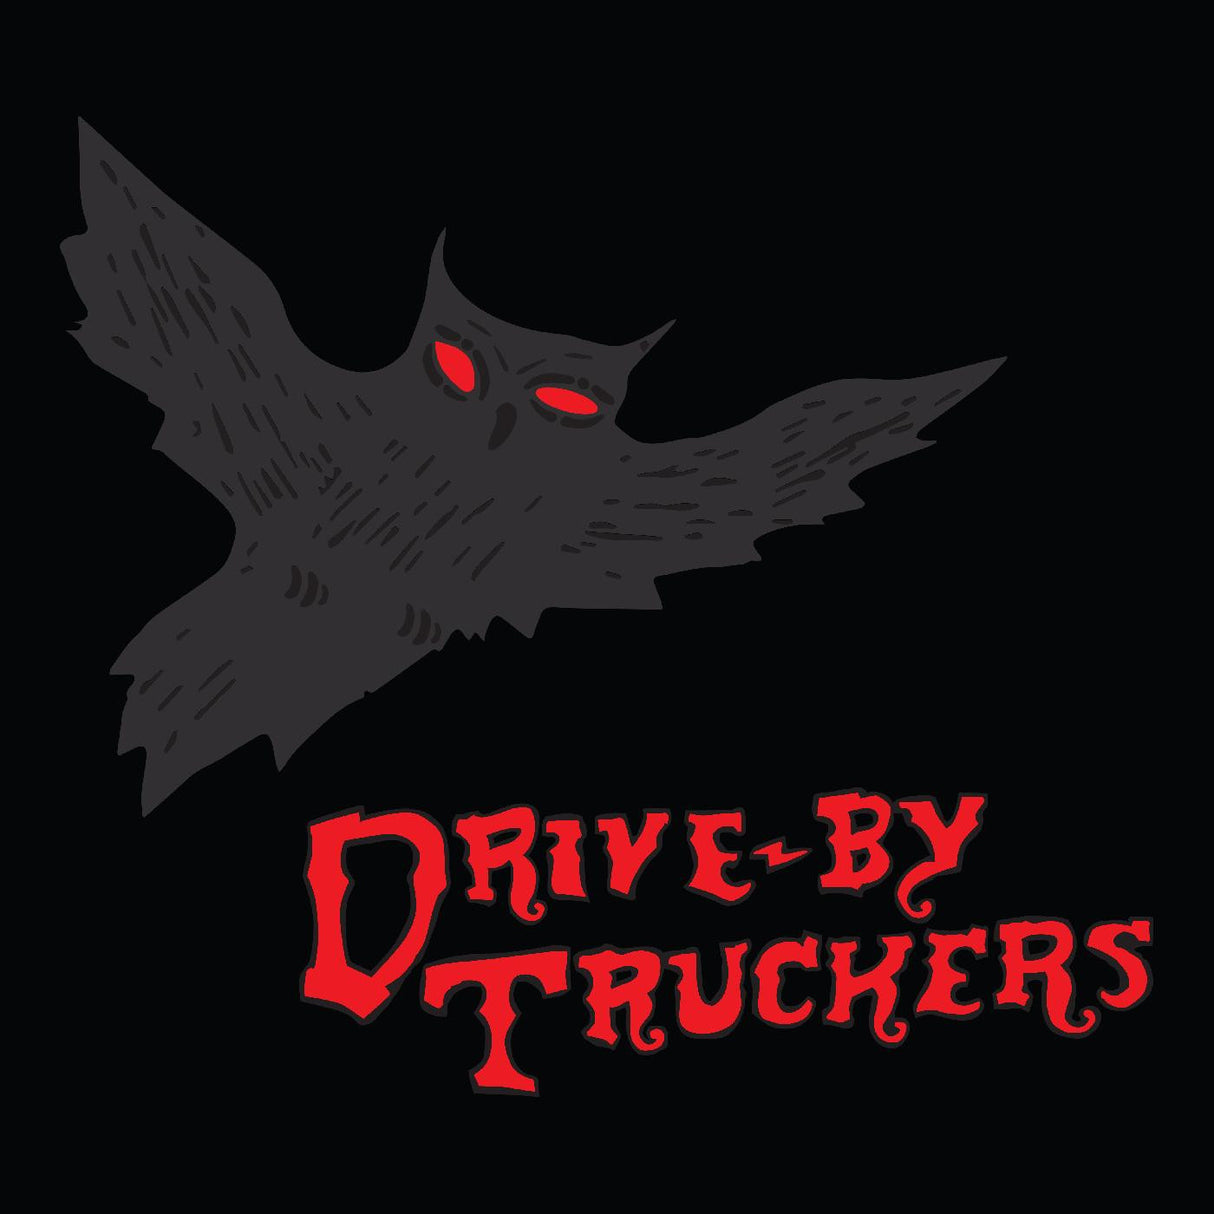 Drive-By Truckers - Southern Rock Opera (DELUXE EDITION) *Pre-Order* [Vinyl]